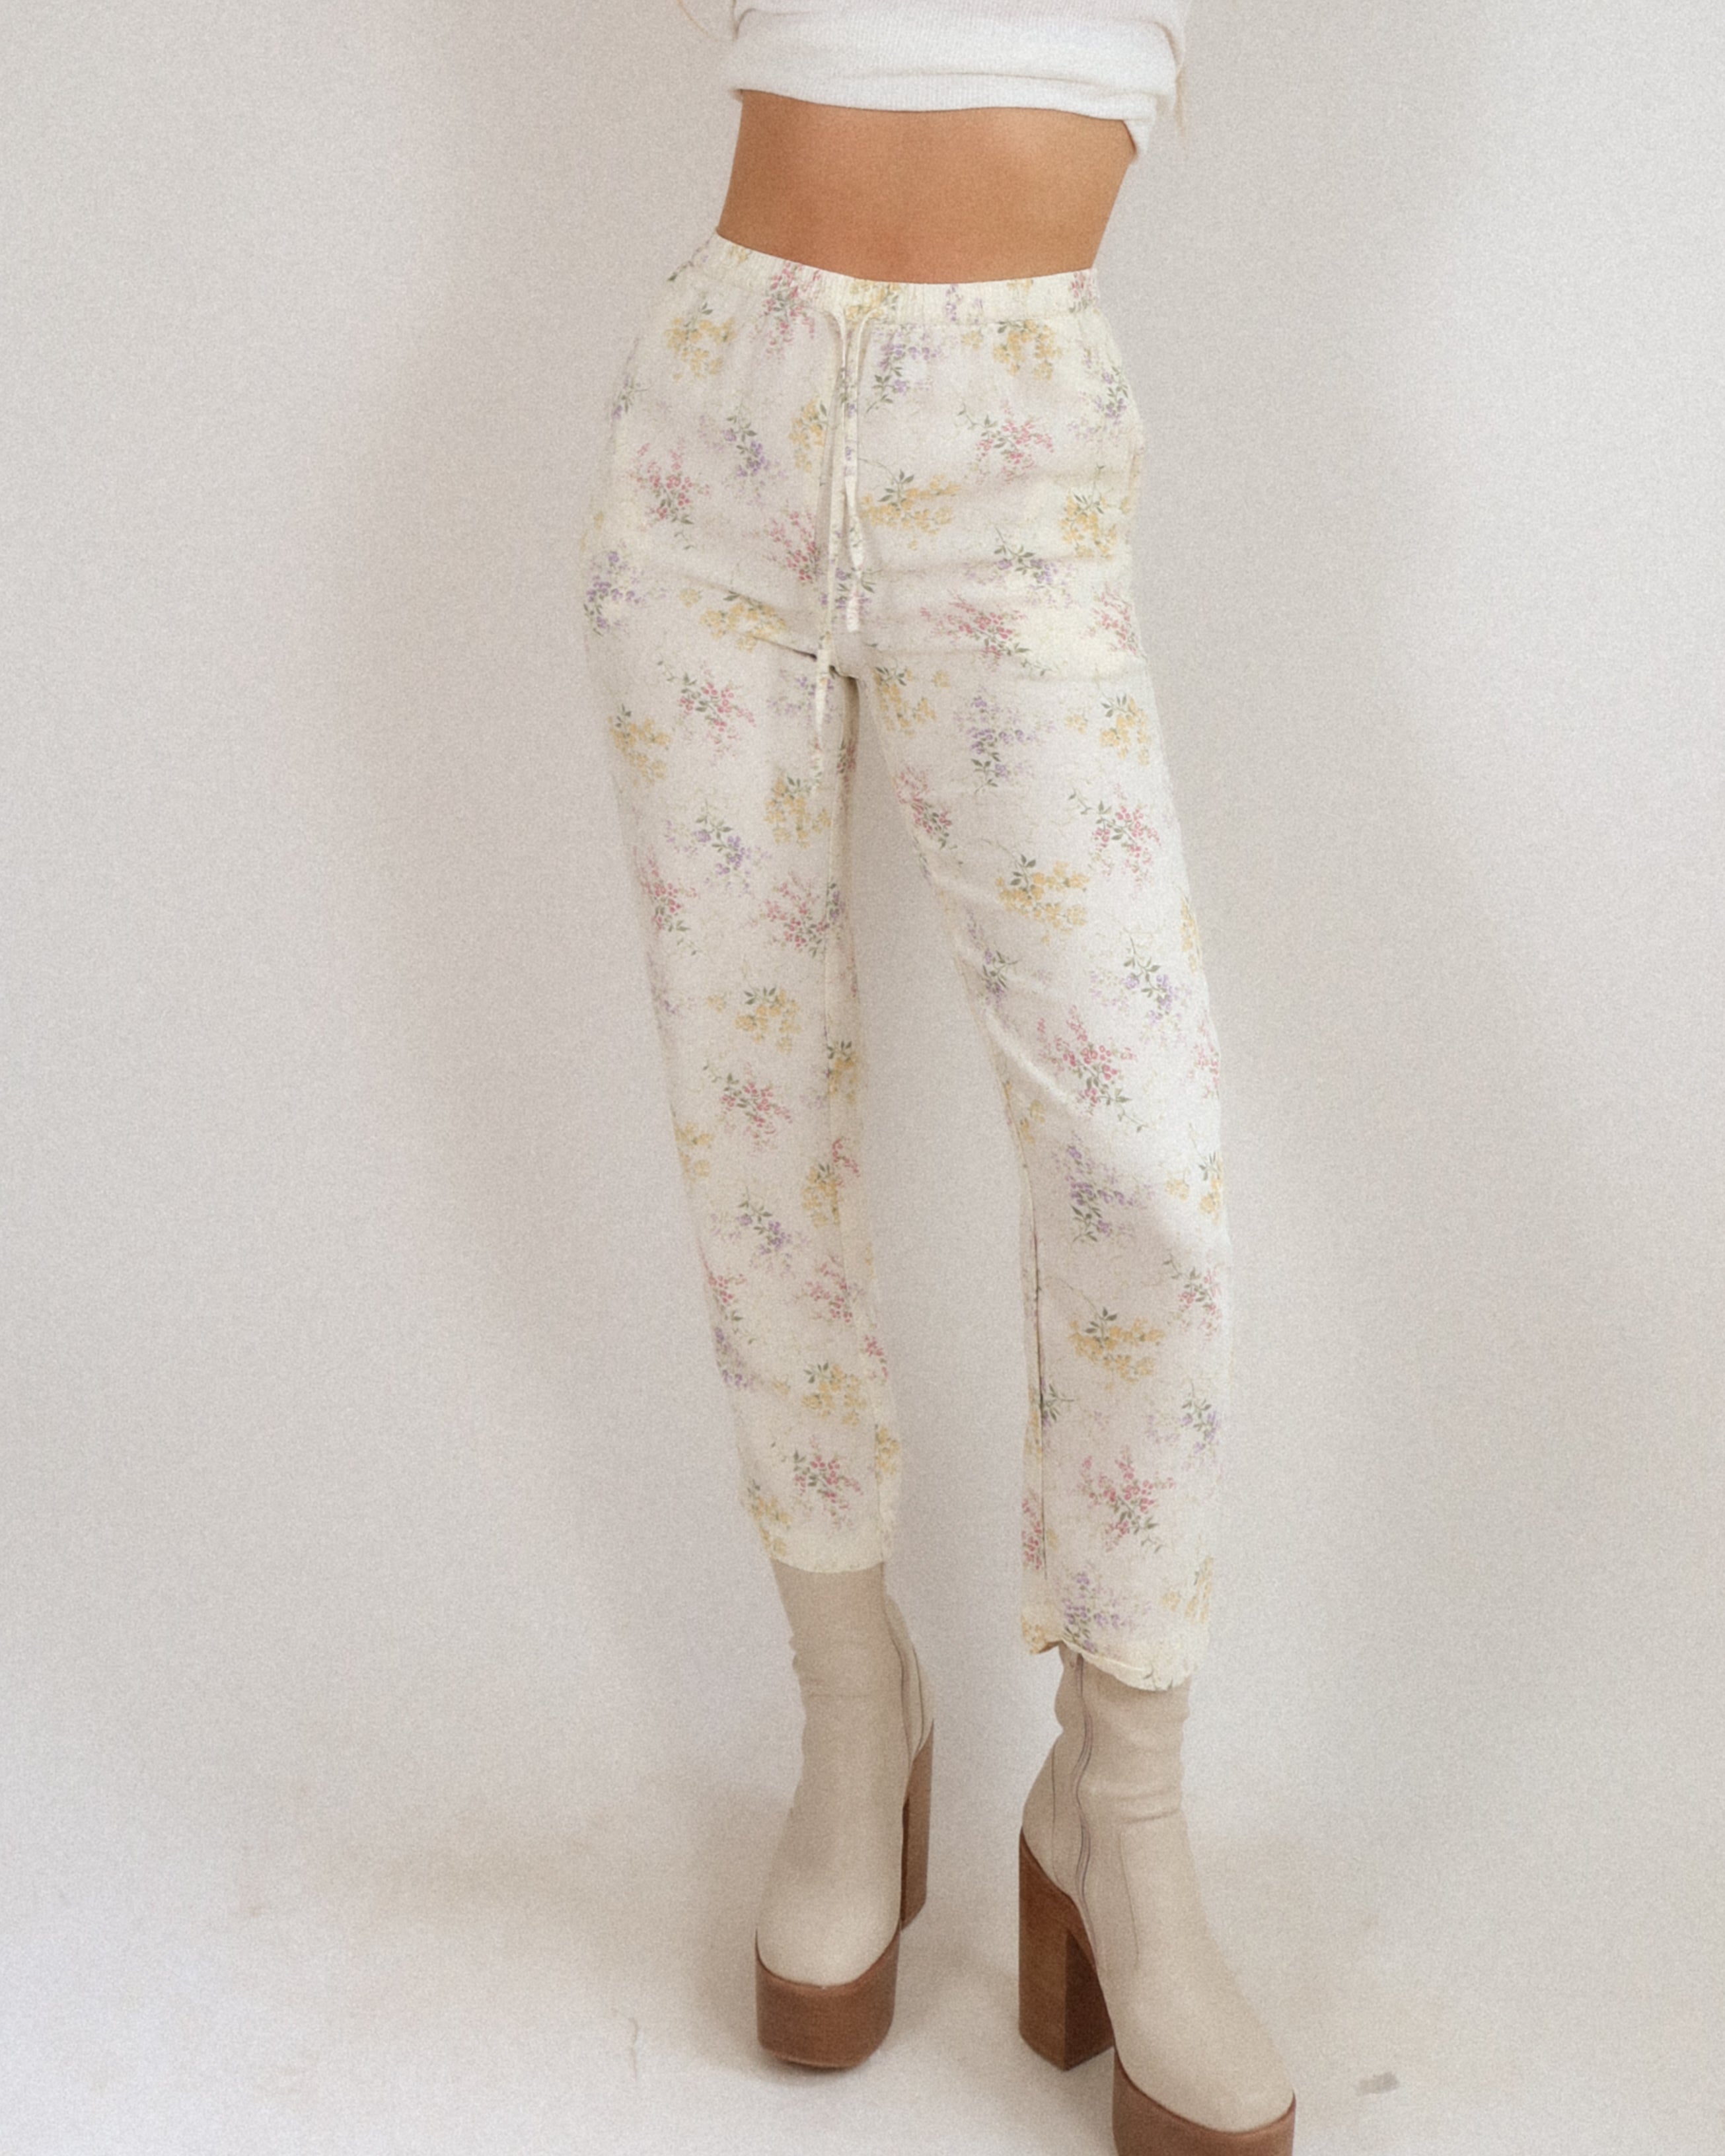 90's Floral Silky Pants